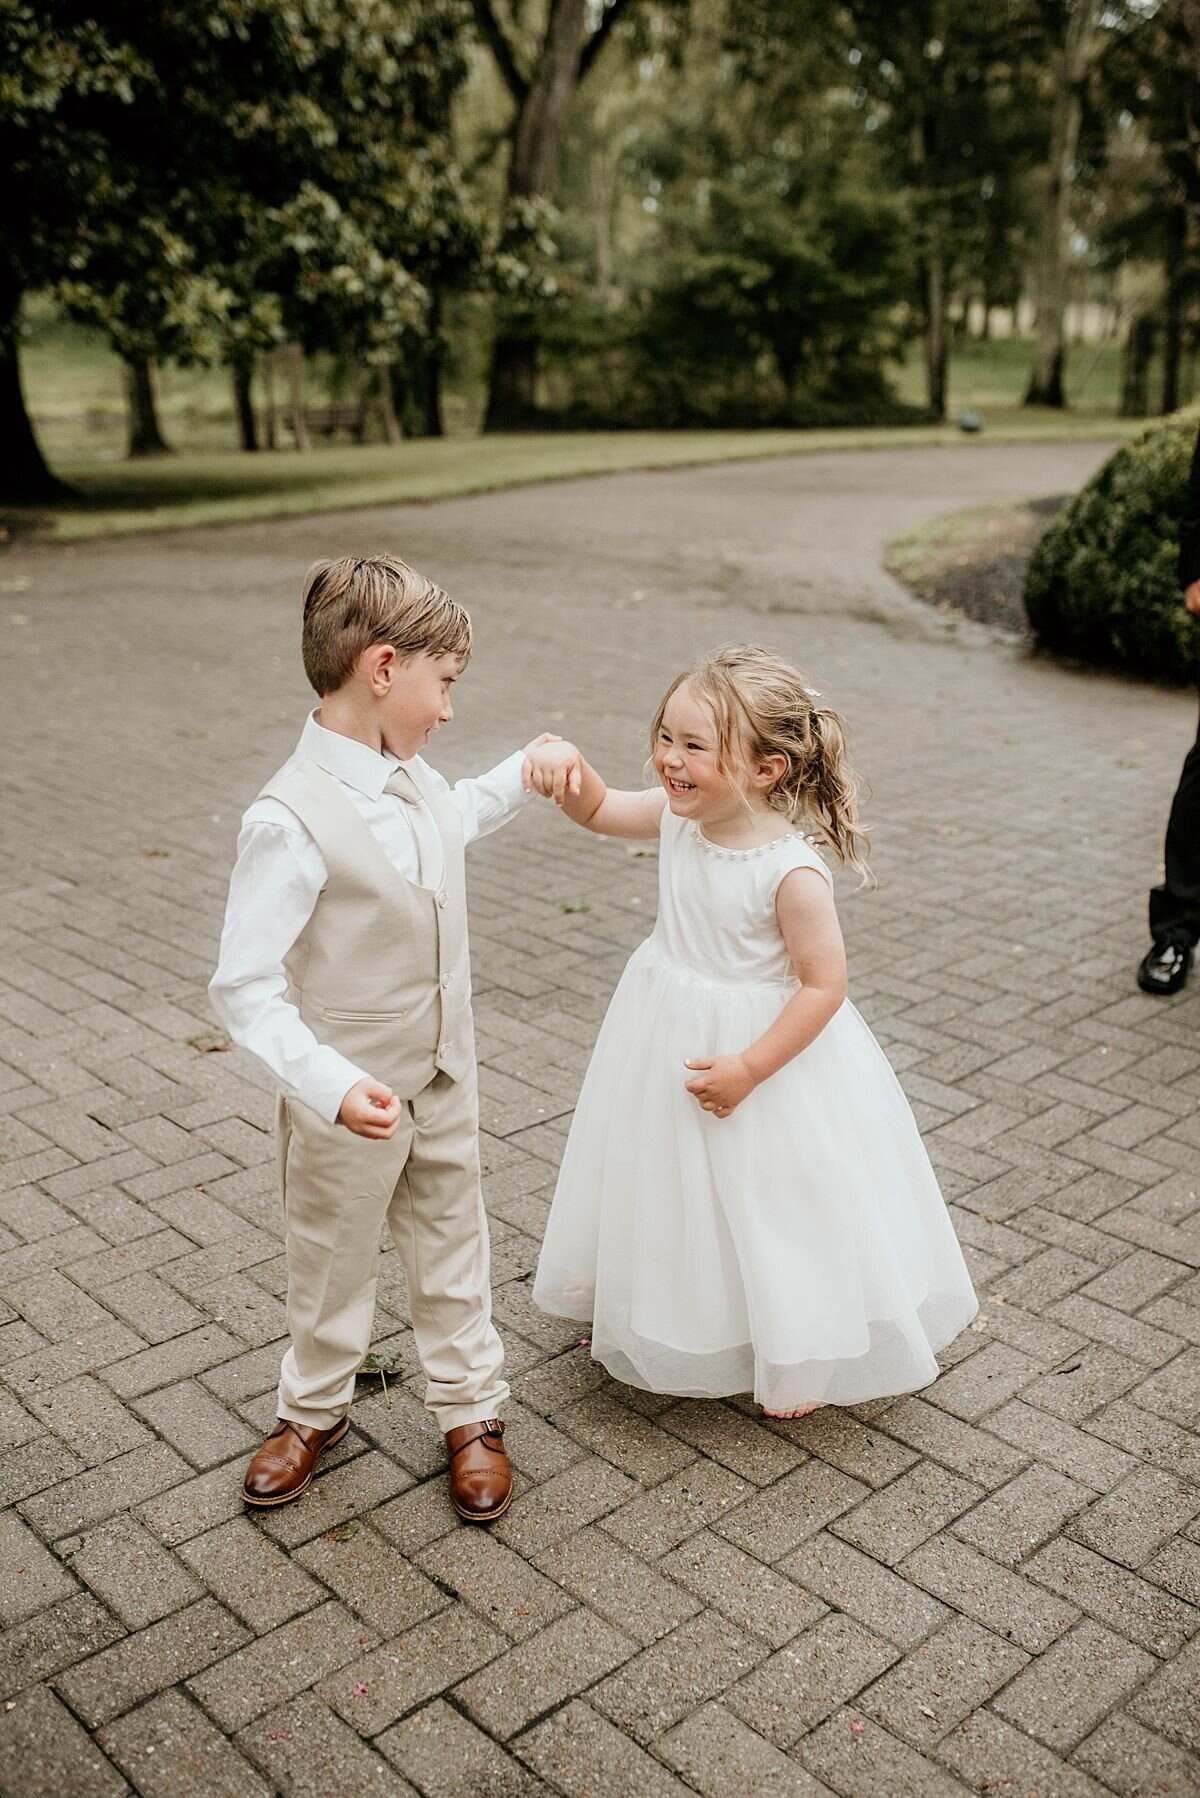 A ring bearer in a white shirt and tan suit dances with the flower girl dressed in a floor length white dress.